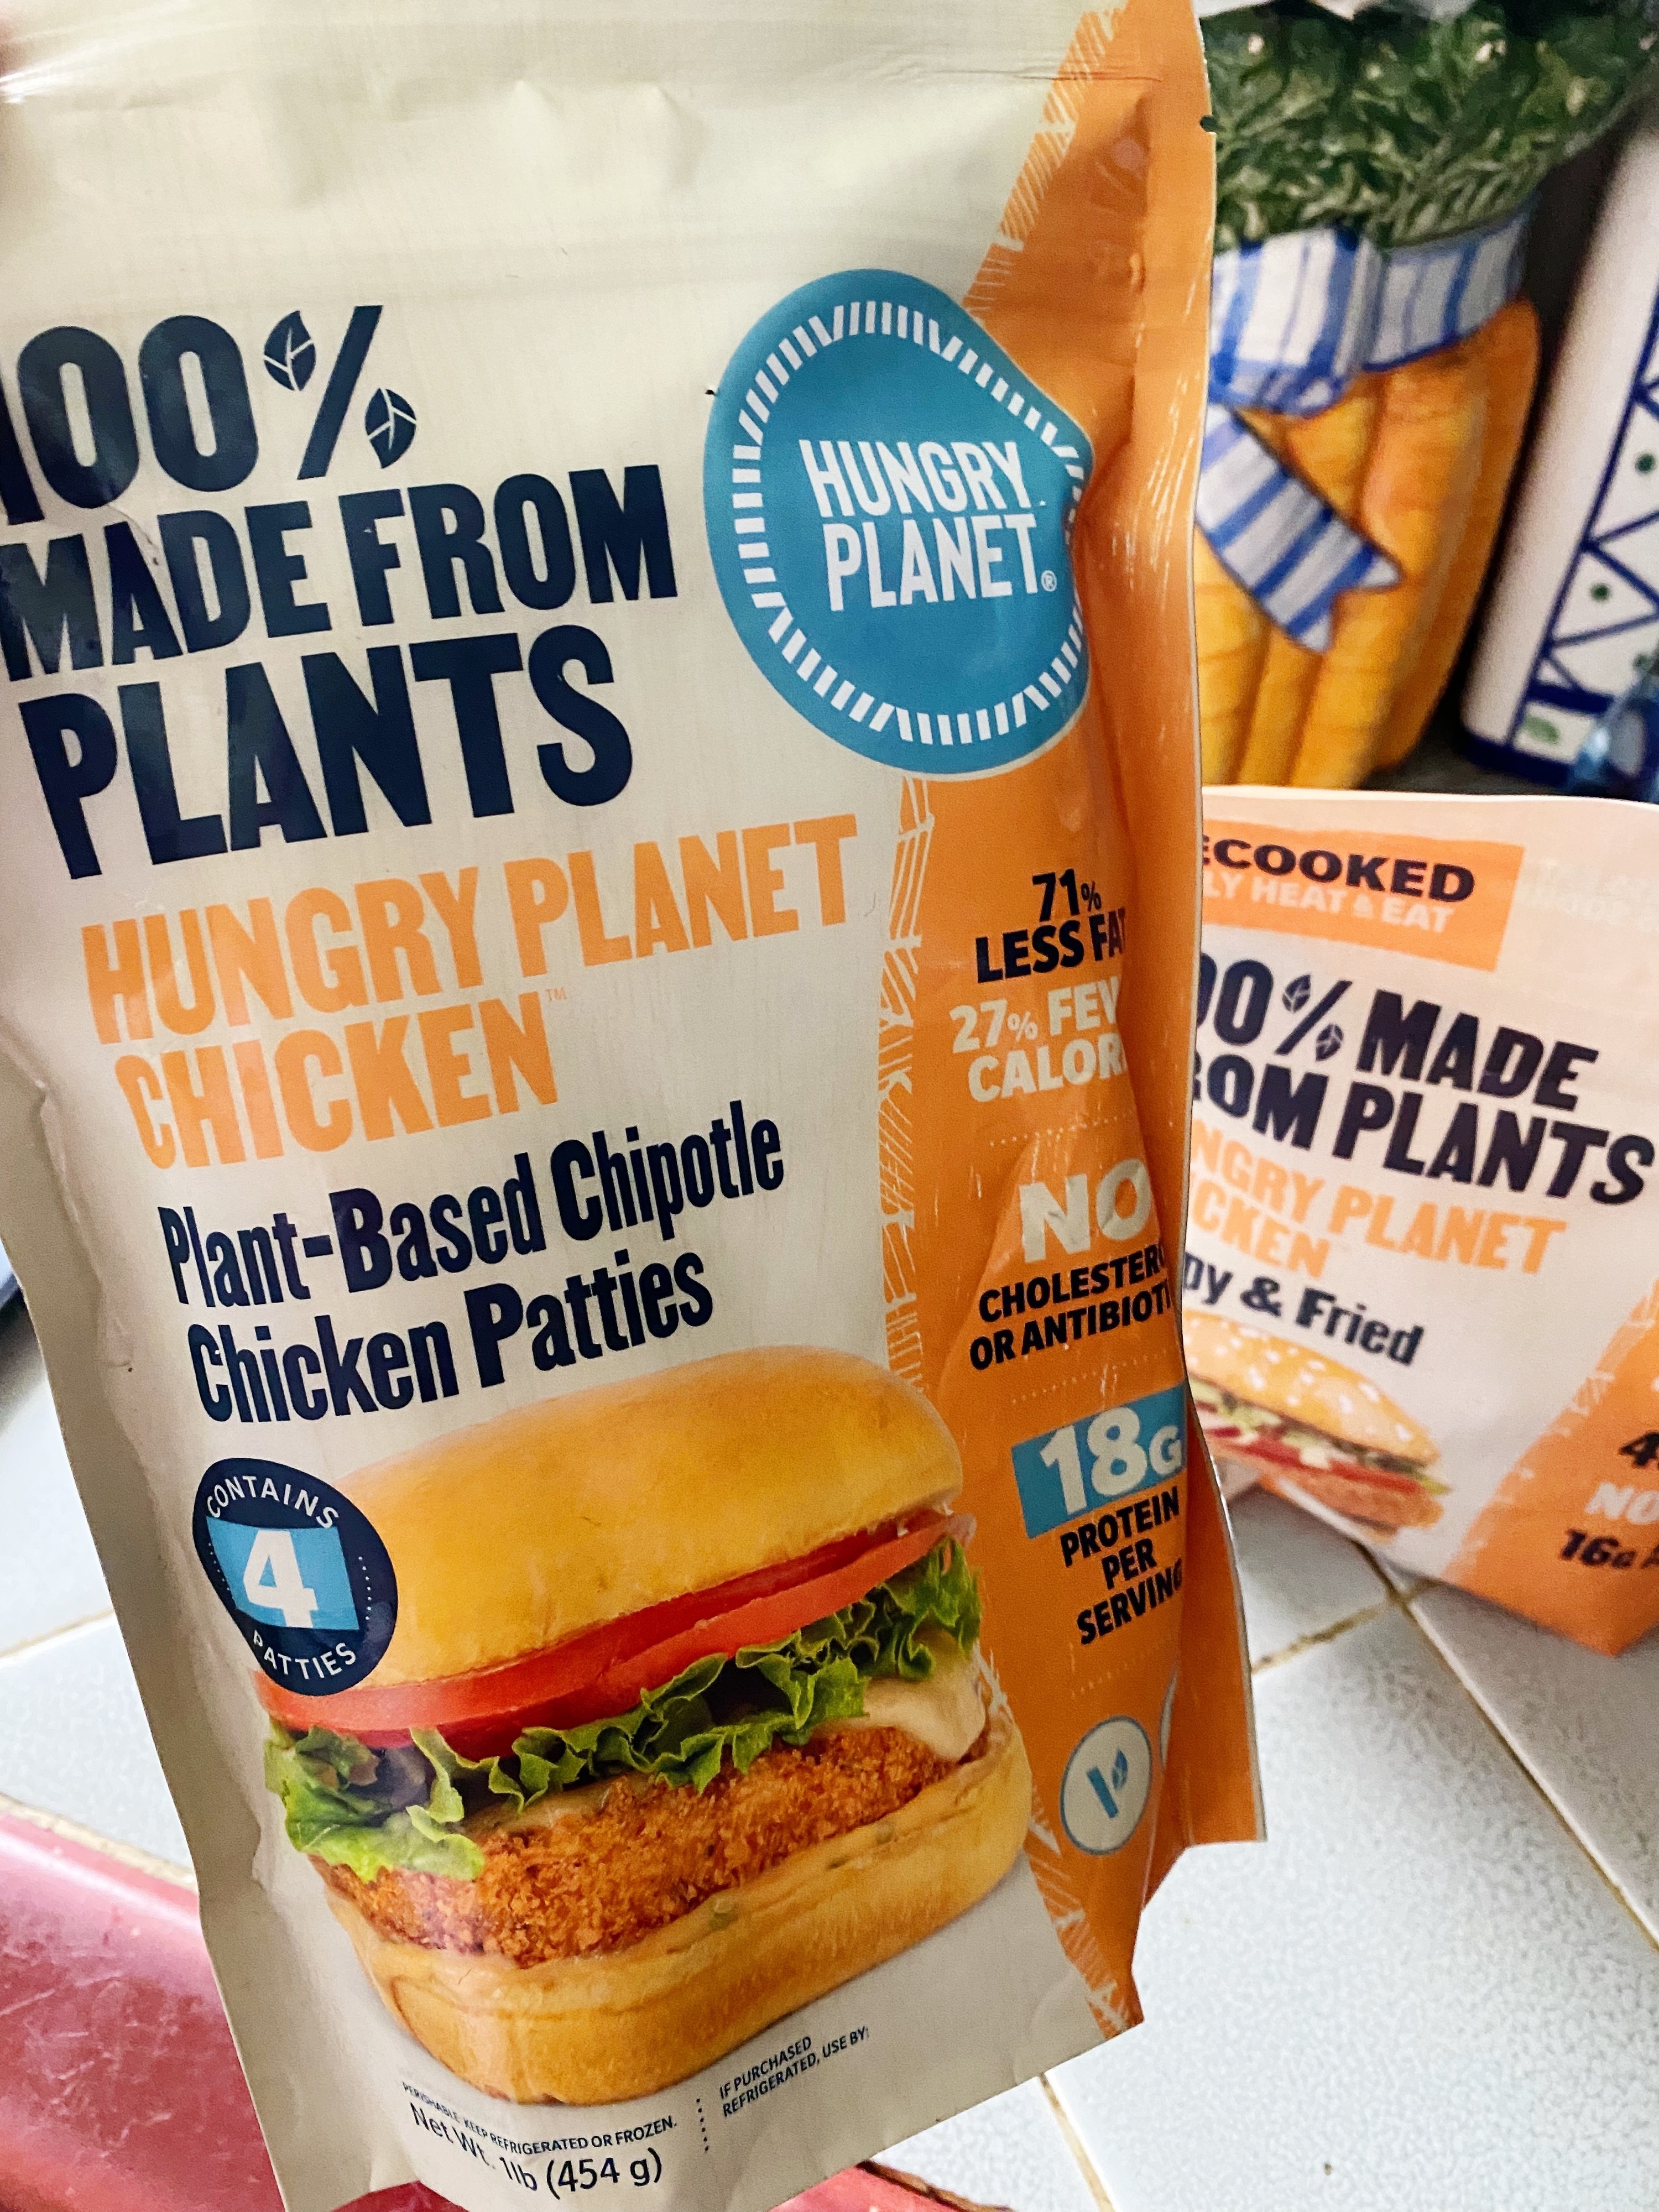 bag of hungry plant chicken patties